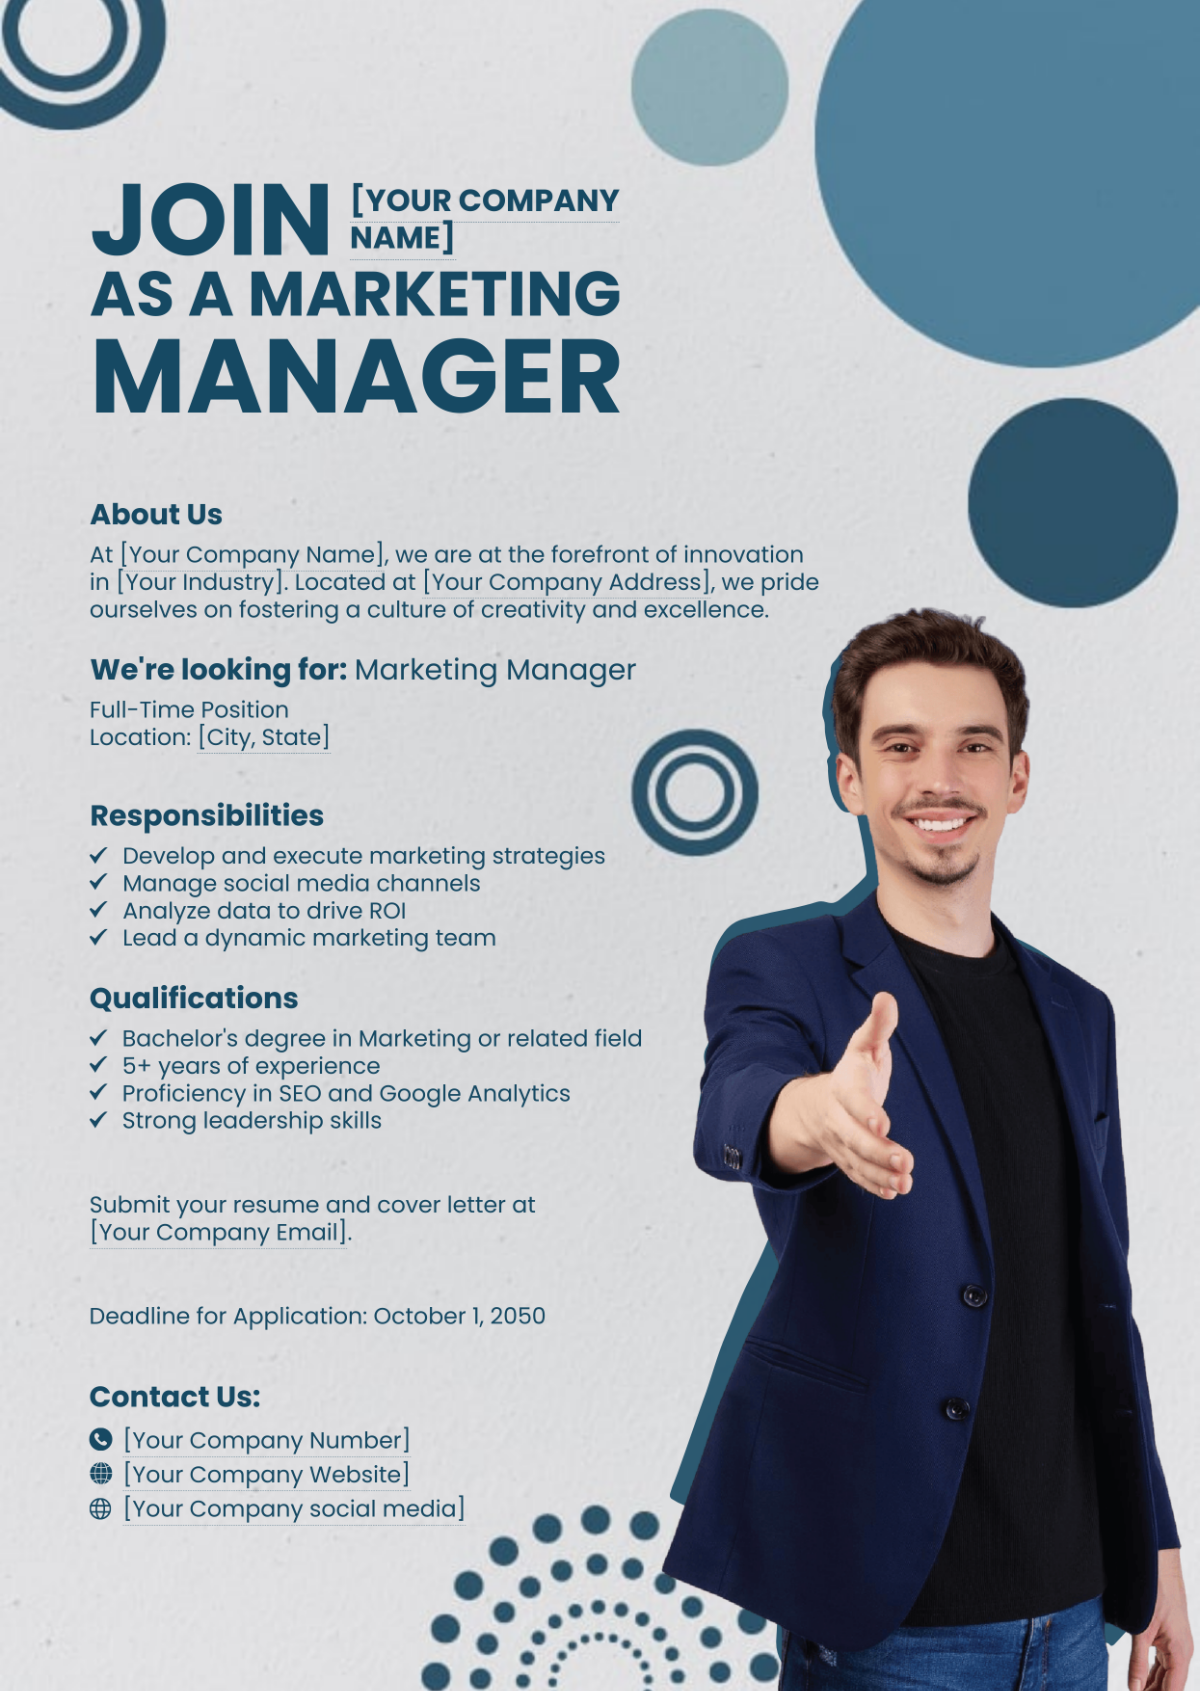 Marketing Manager Job Ad Template